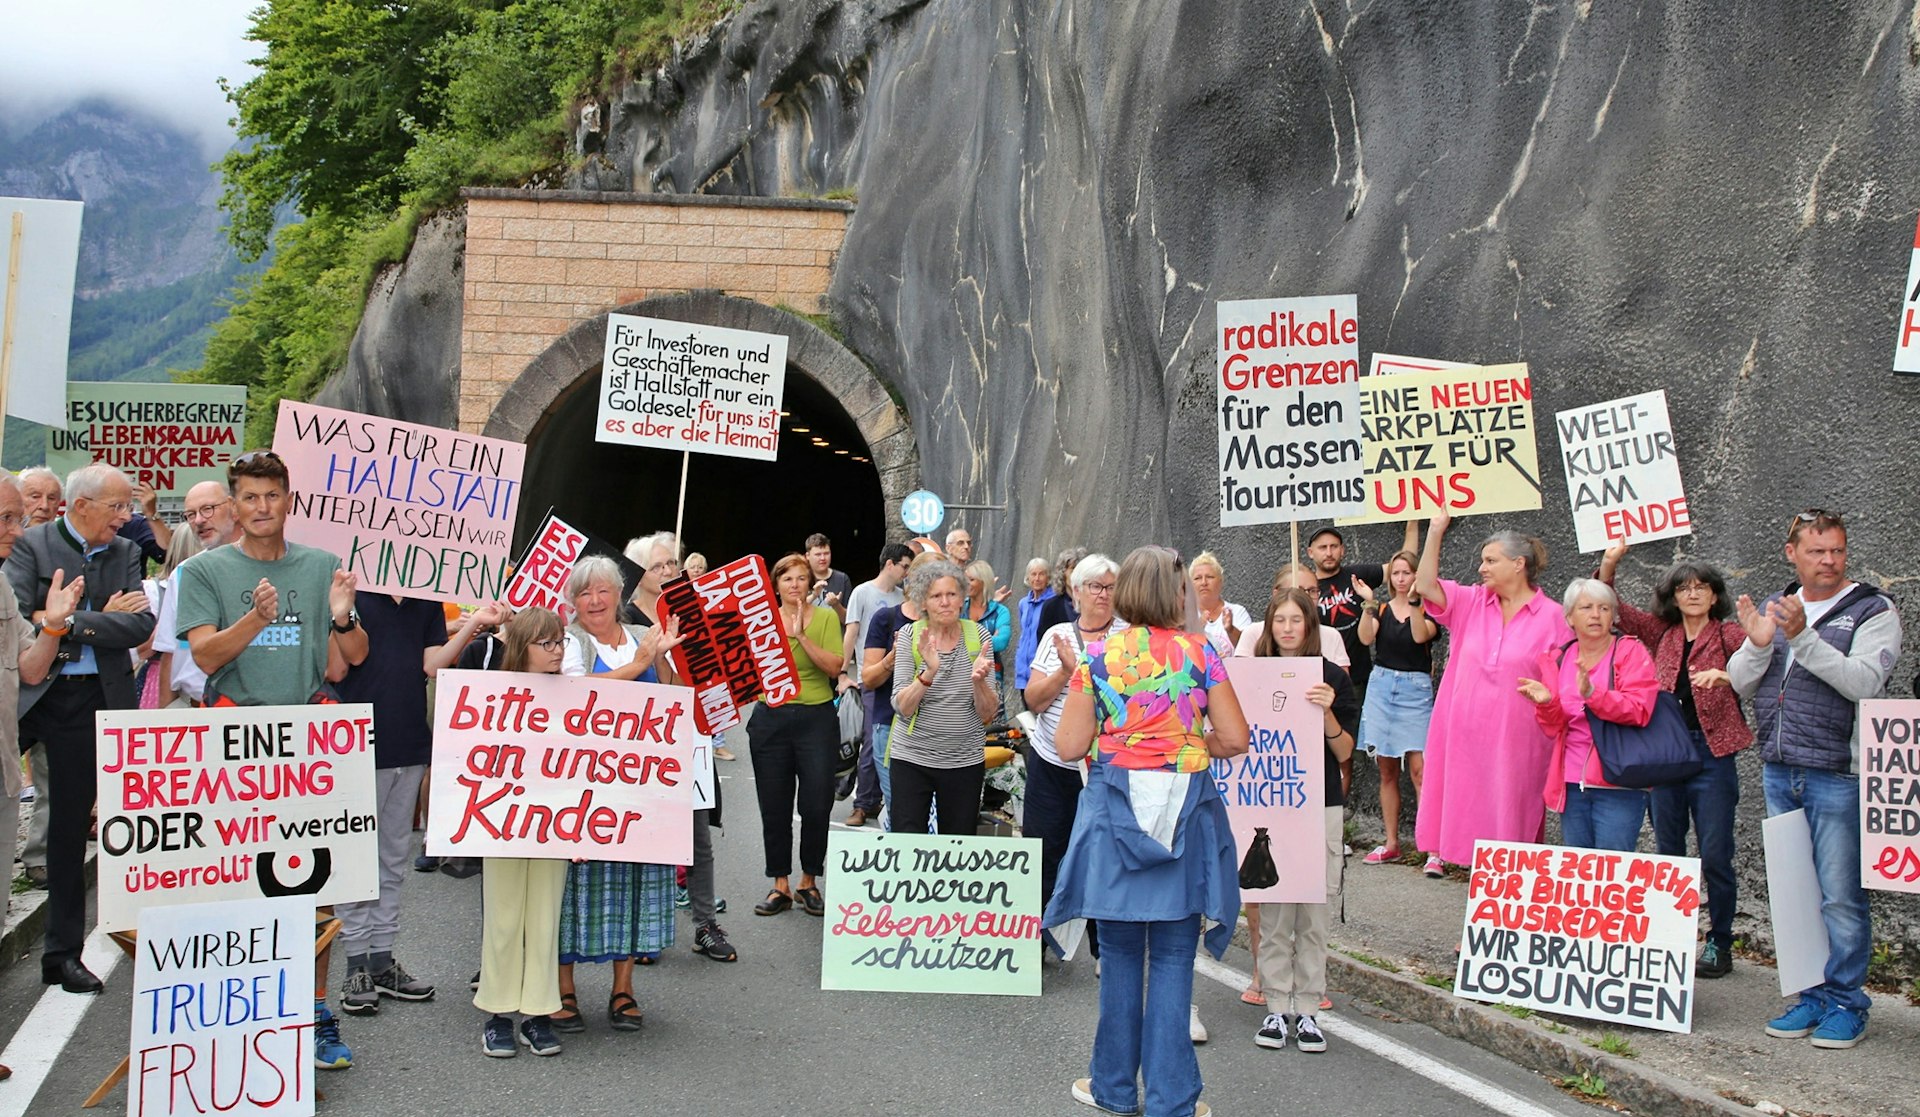 Locals protest against “overtourism” and block the road tunnel in the world-renowned sightseeing town of Hallstatt near Gmunden in Upper Austria